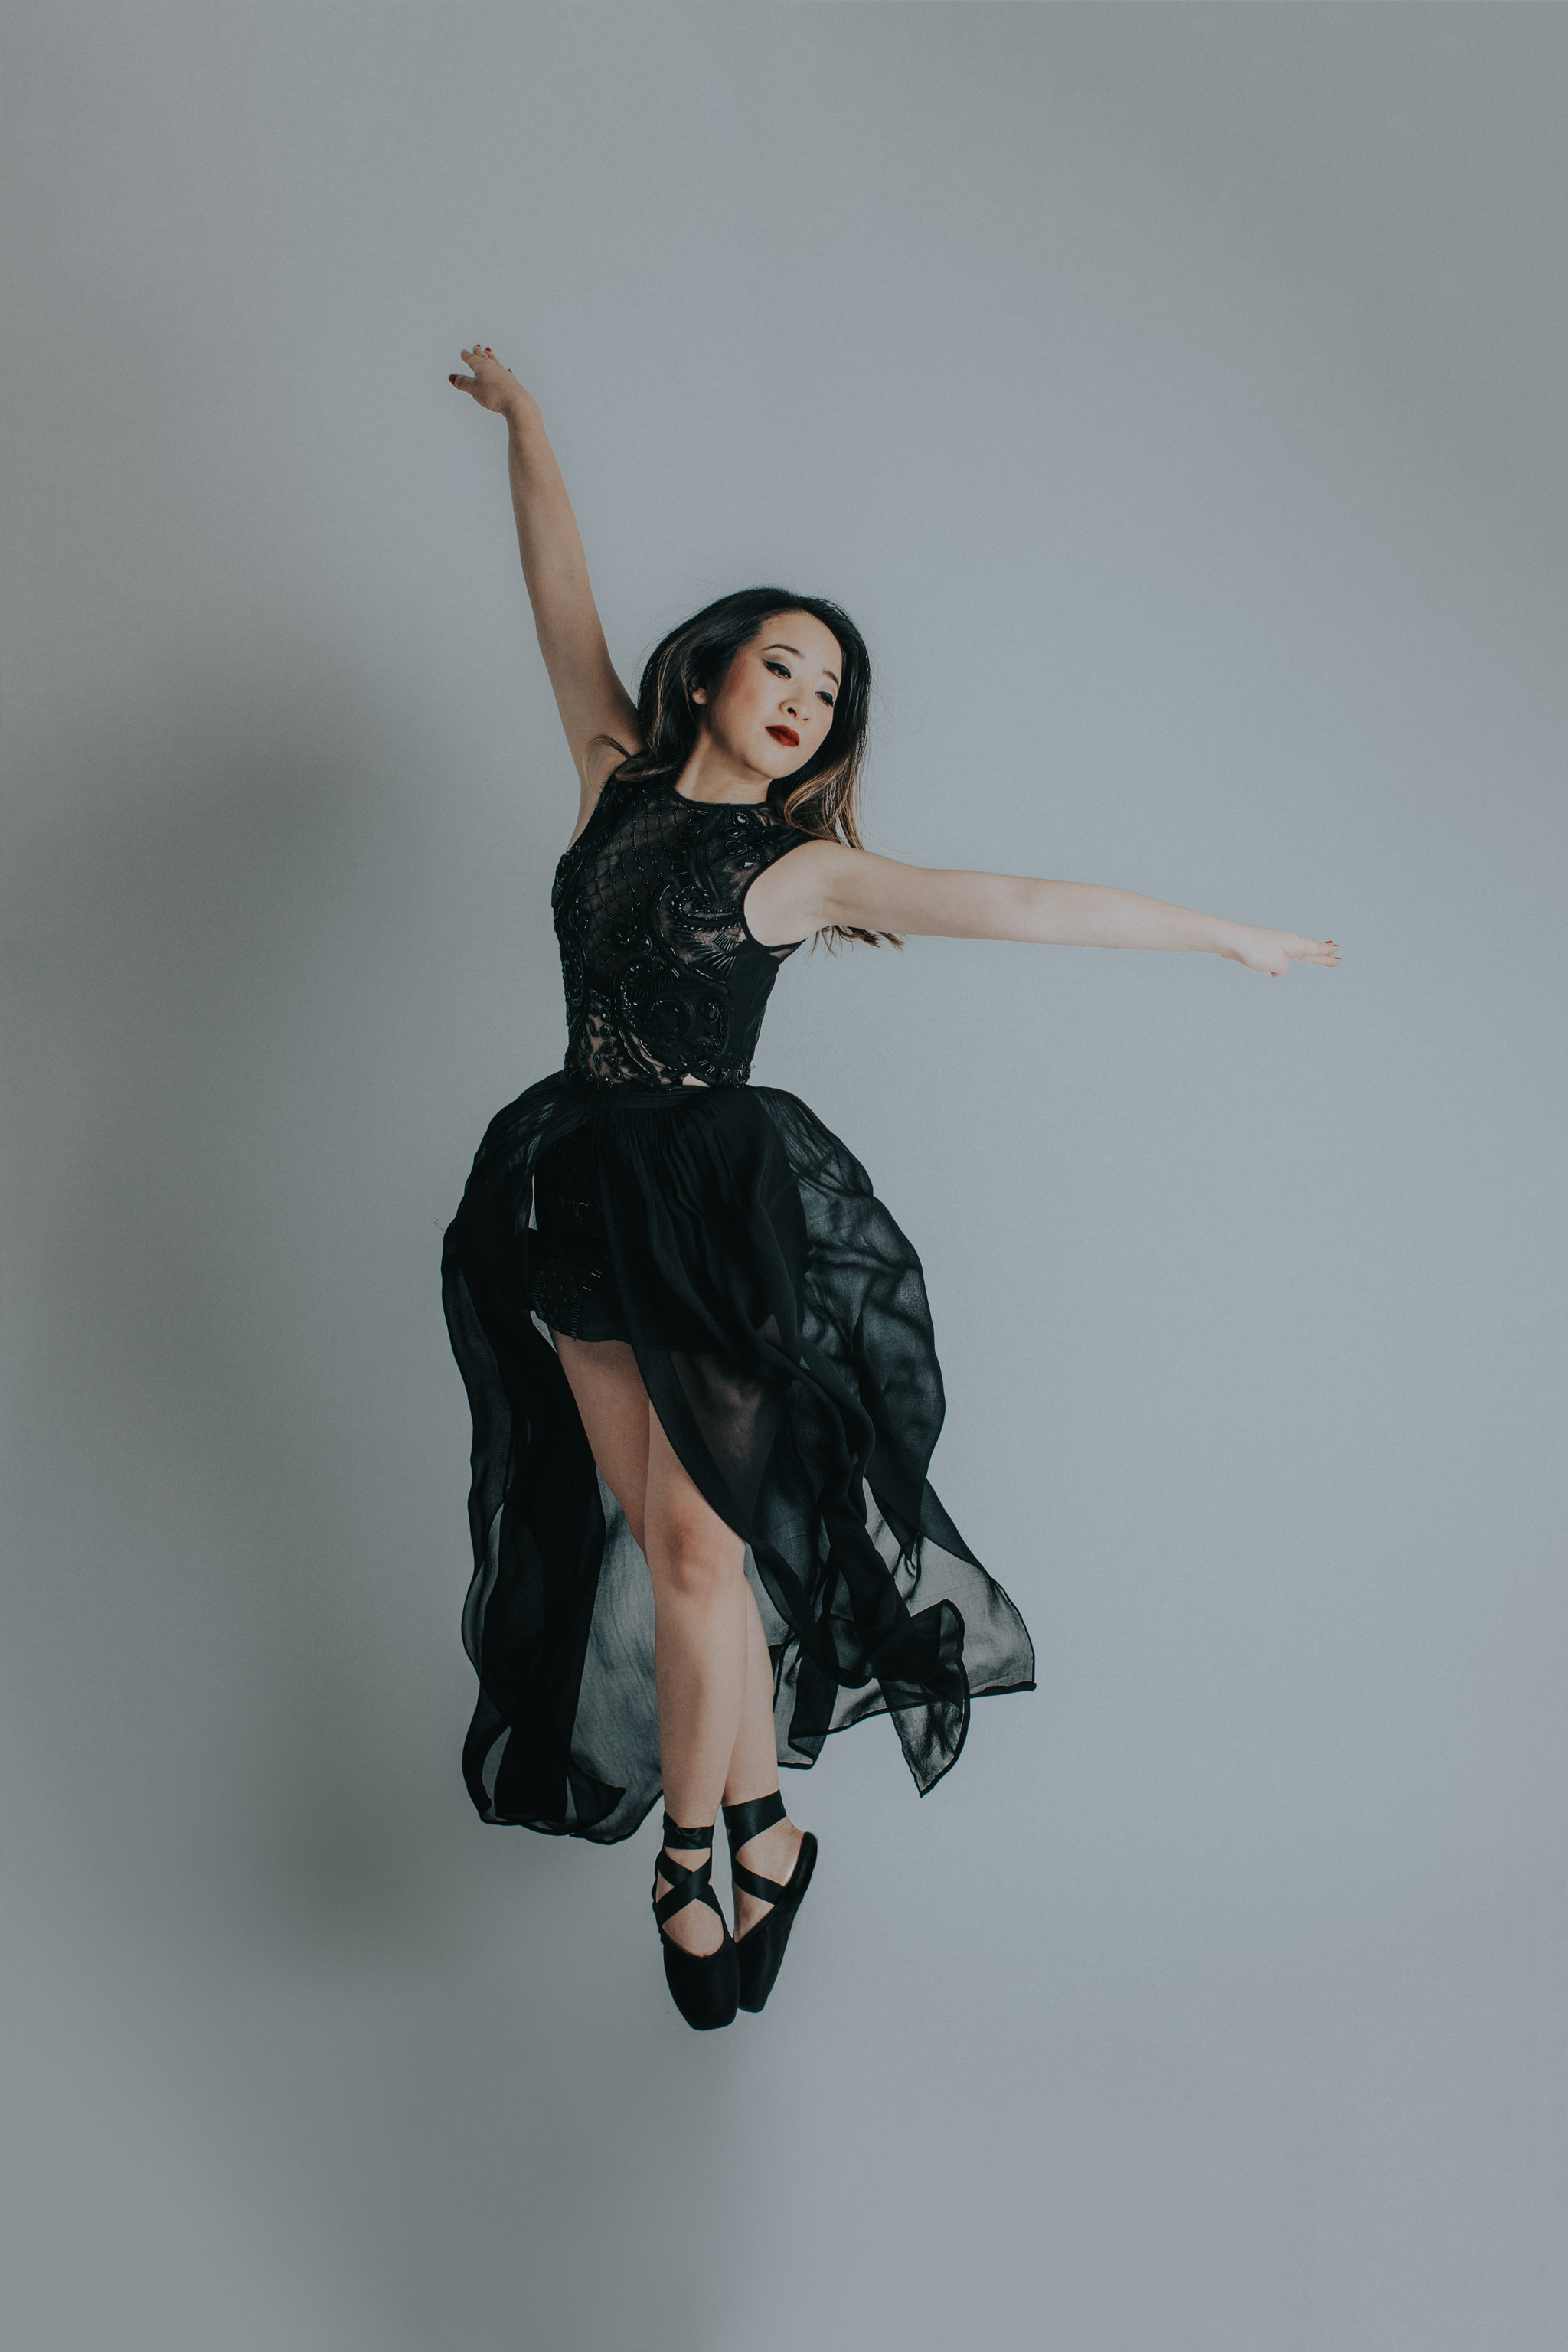 dance photography in melbourne - dance studio shots for professional dancers